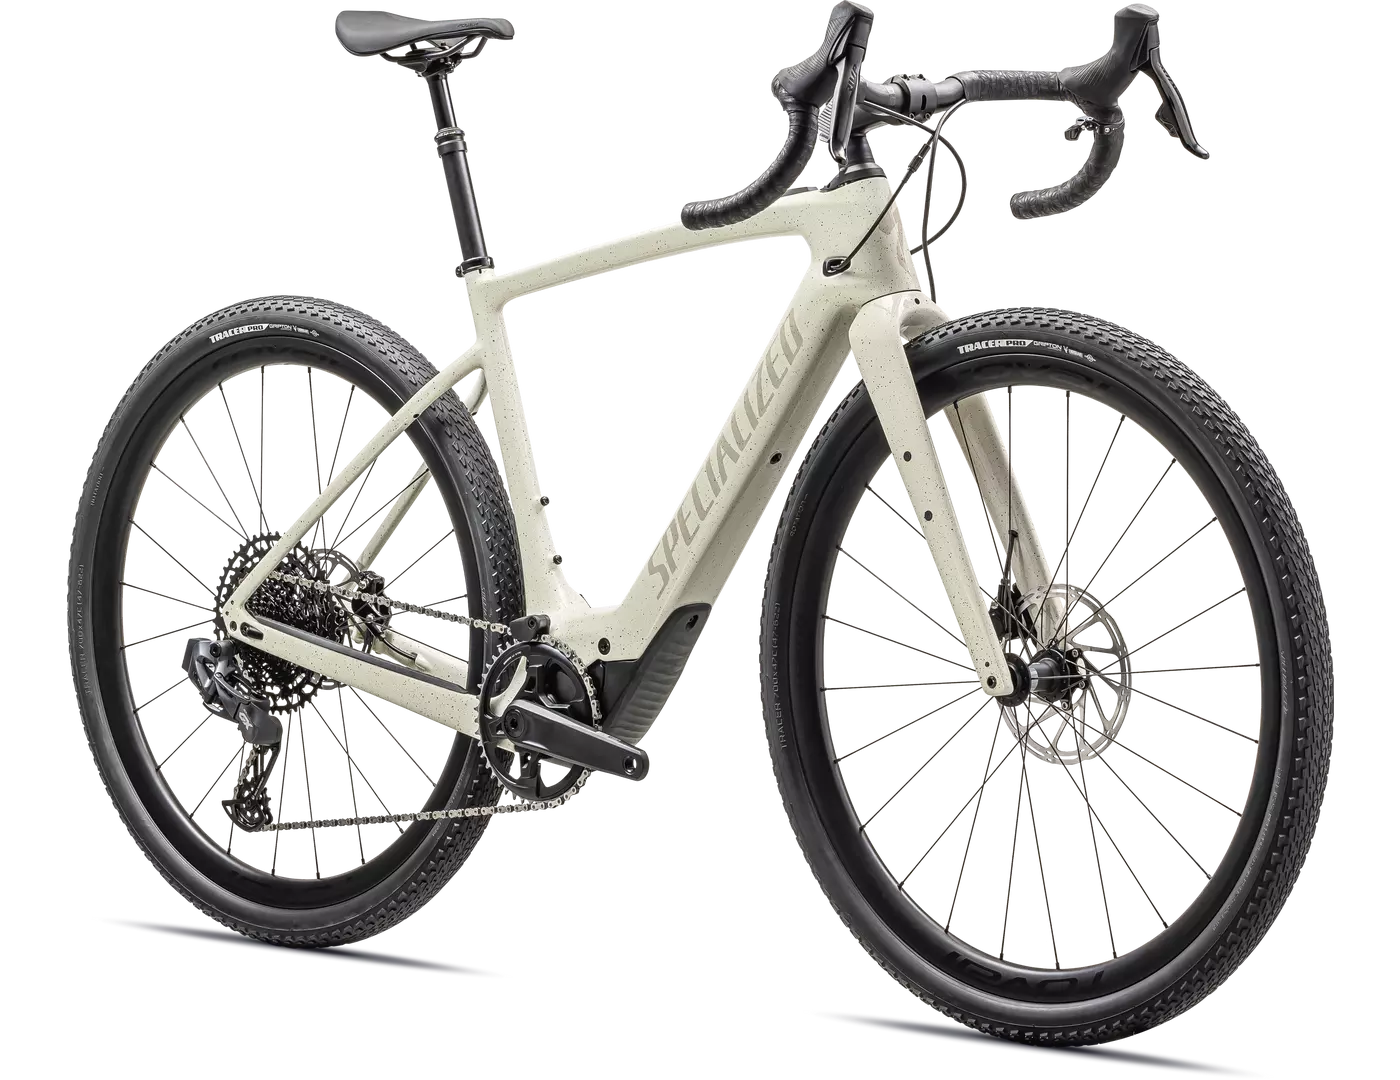 SPECIALIZED CREO 2 EXPERT ELECTRIC BIKE